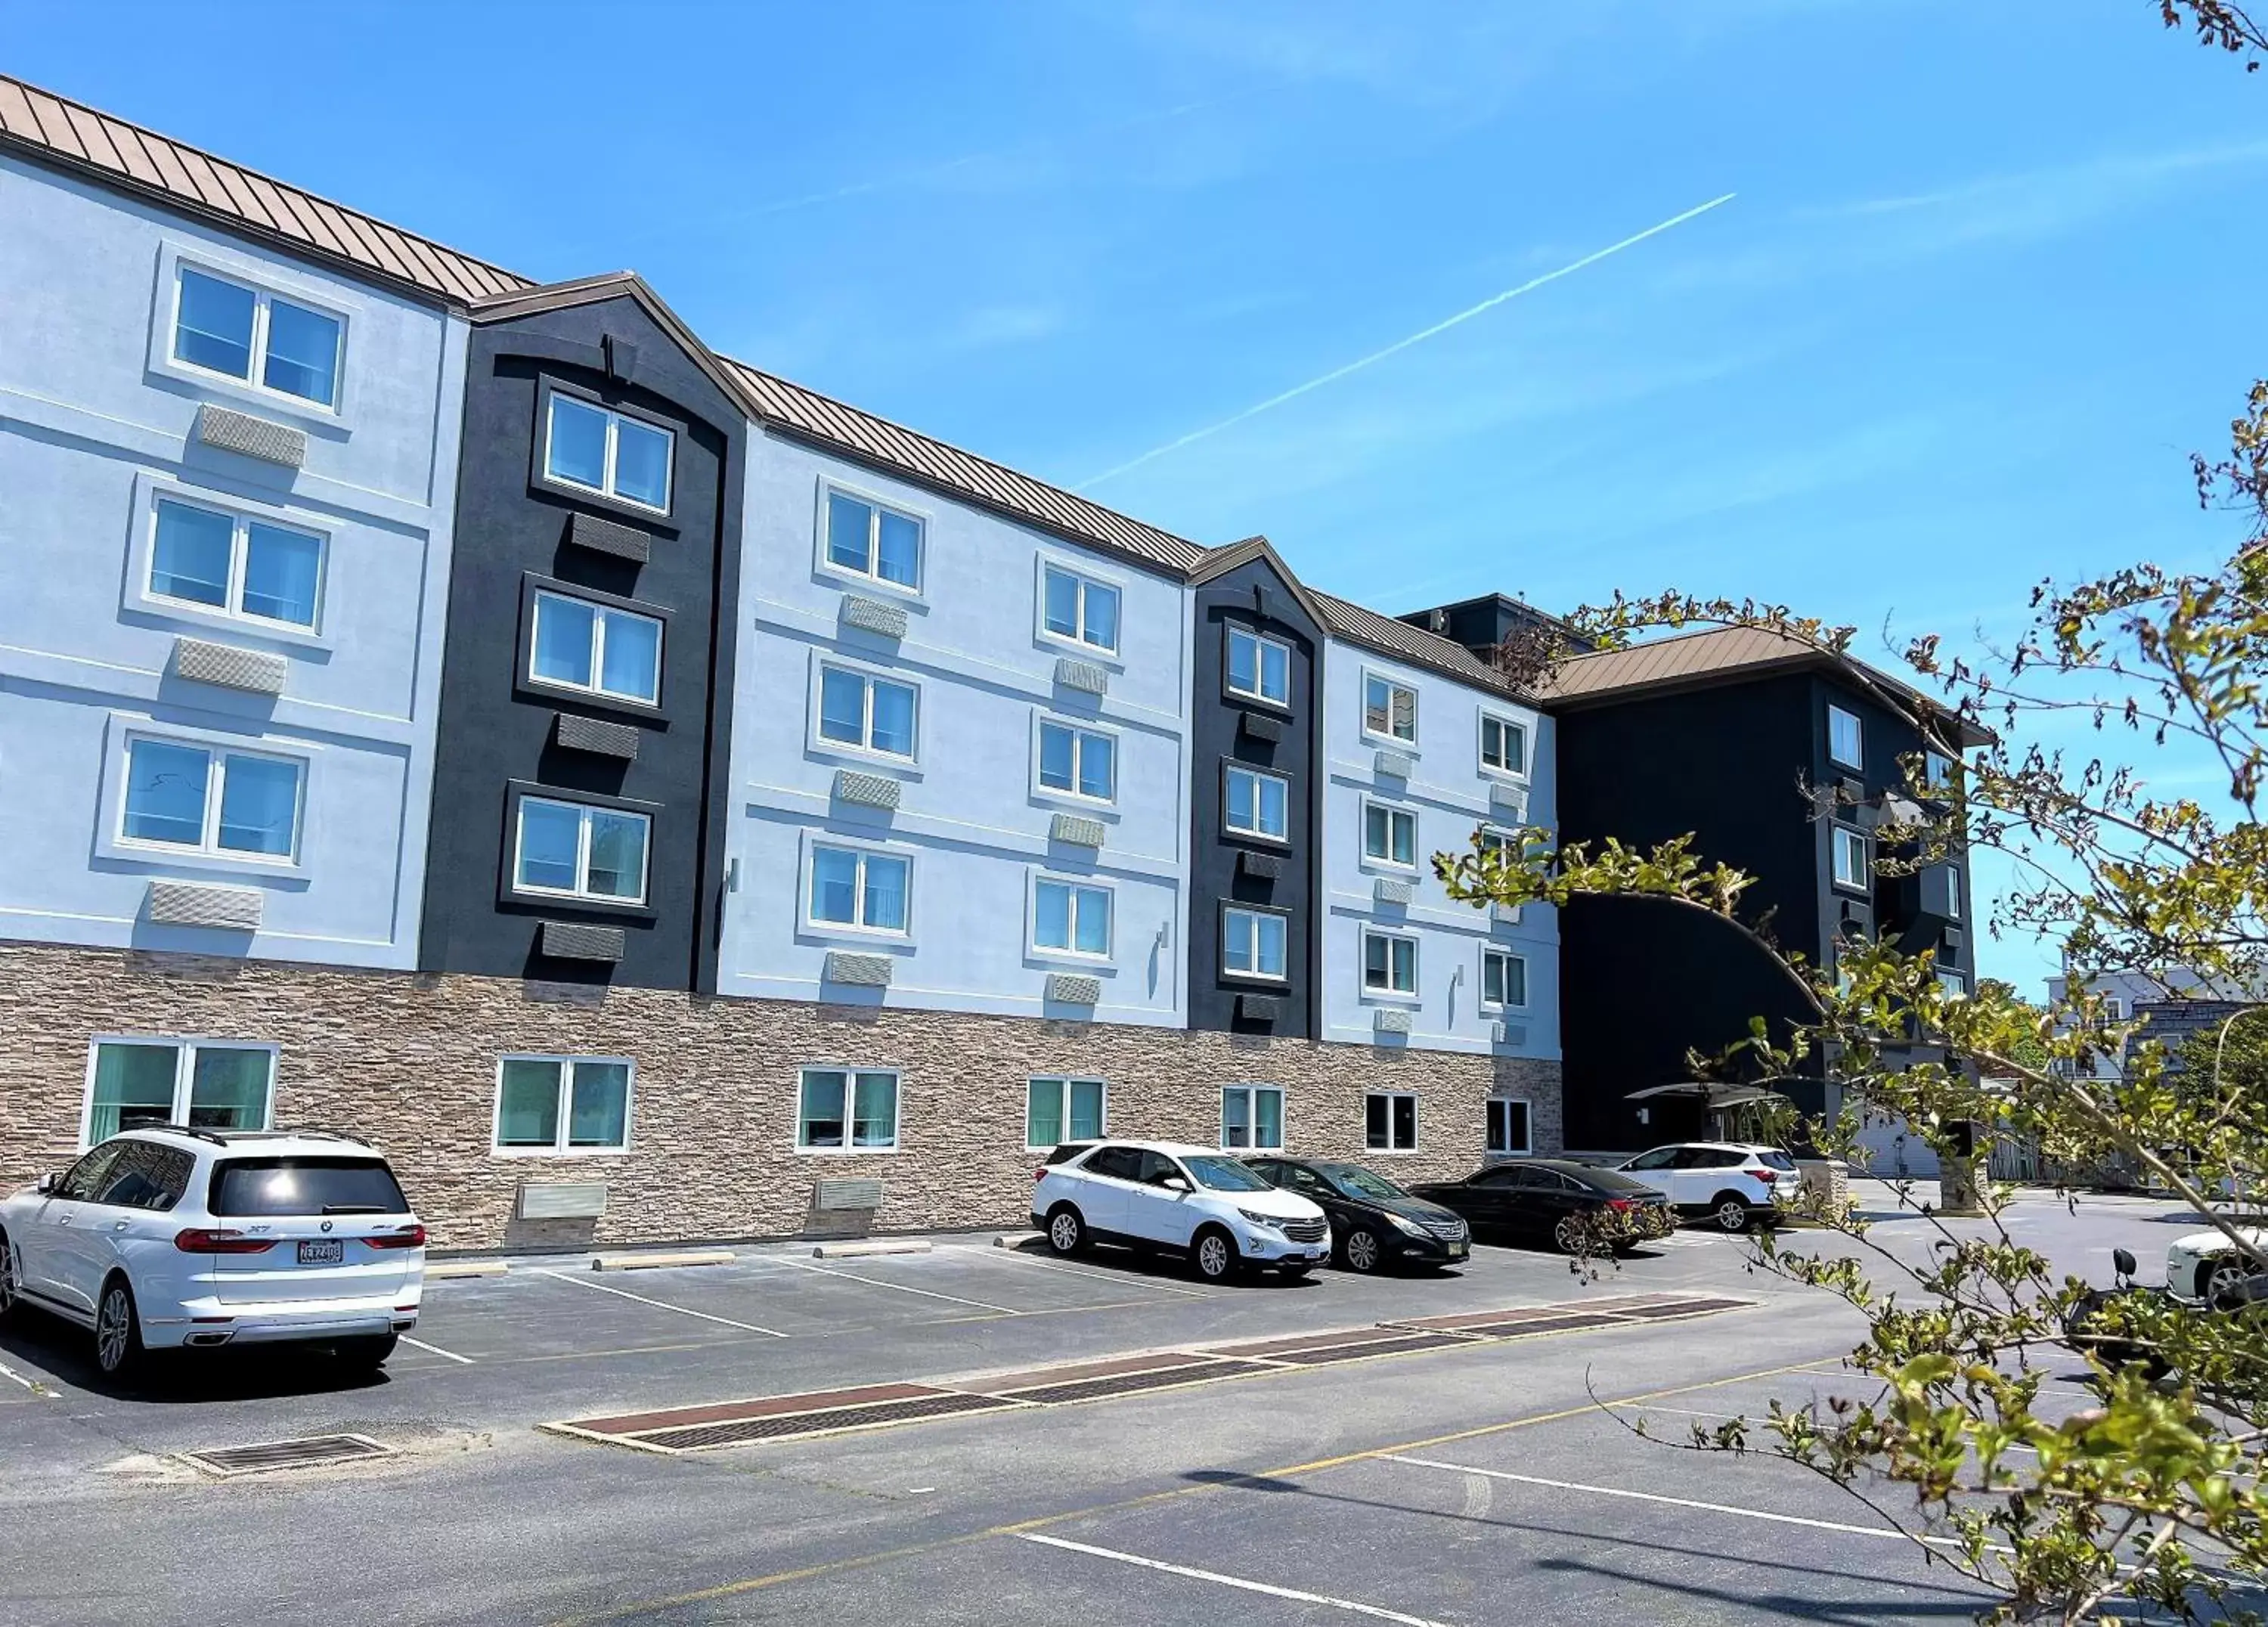 Property Building in Quality Inn & Suites Rehoboth Beach – Dewey